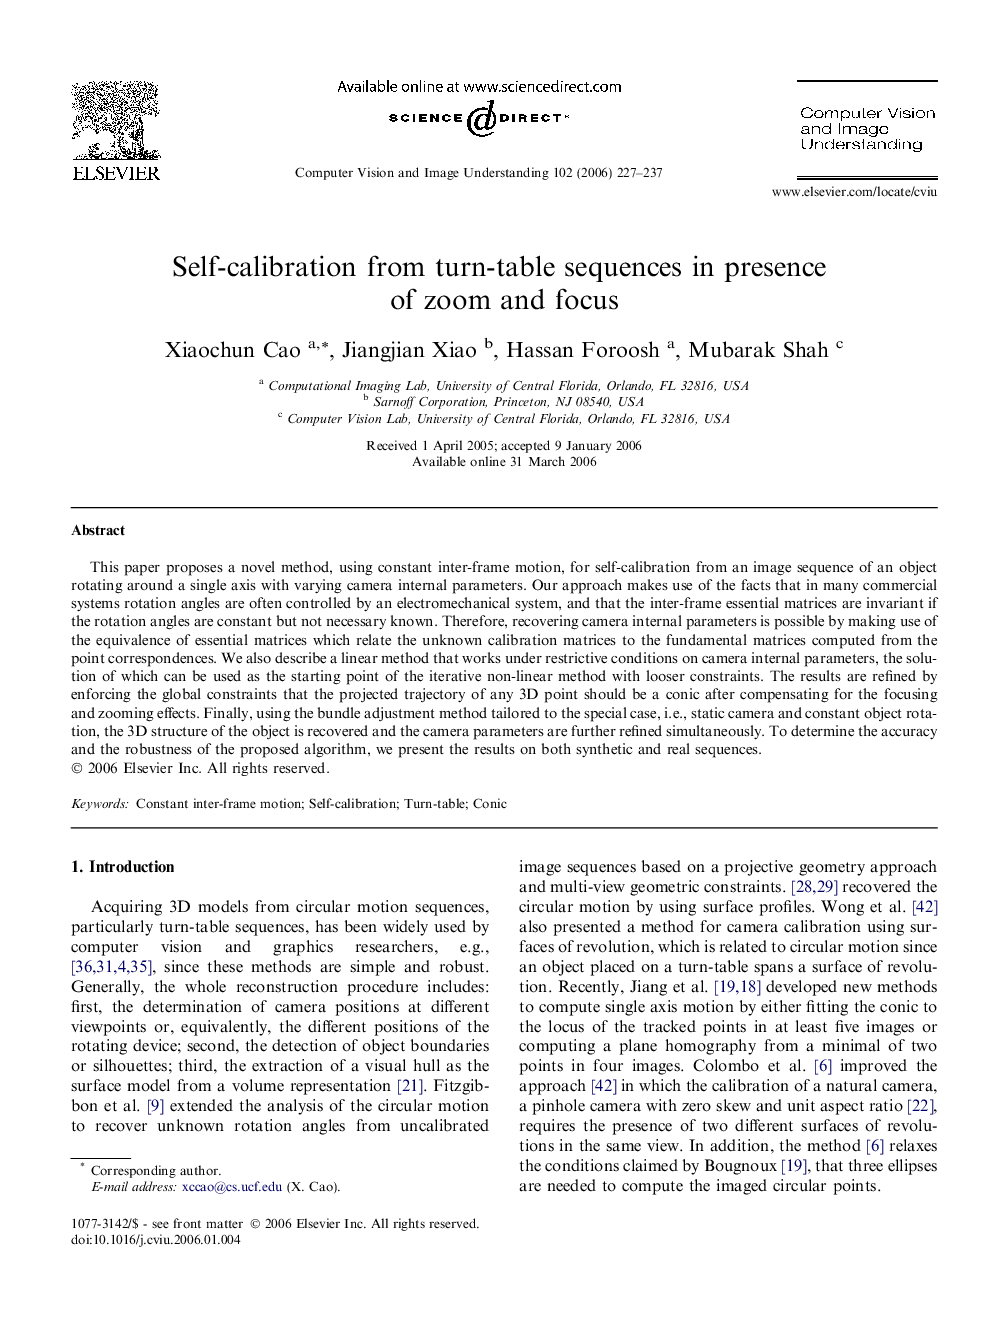 Self-calibration from turn-table sequences in presence of zoom and focus